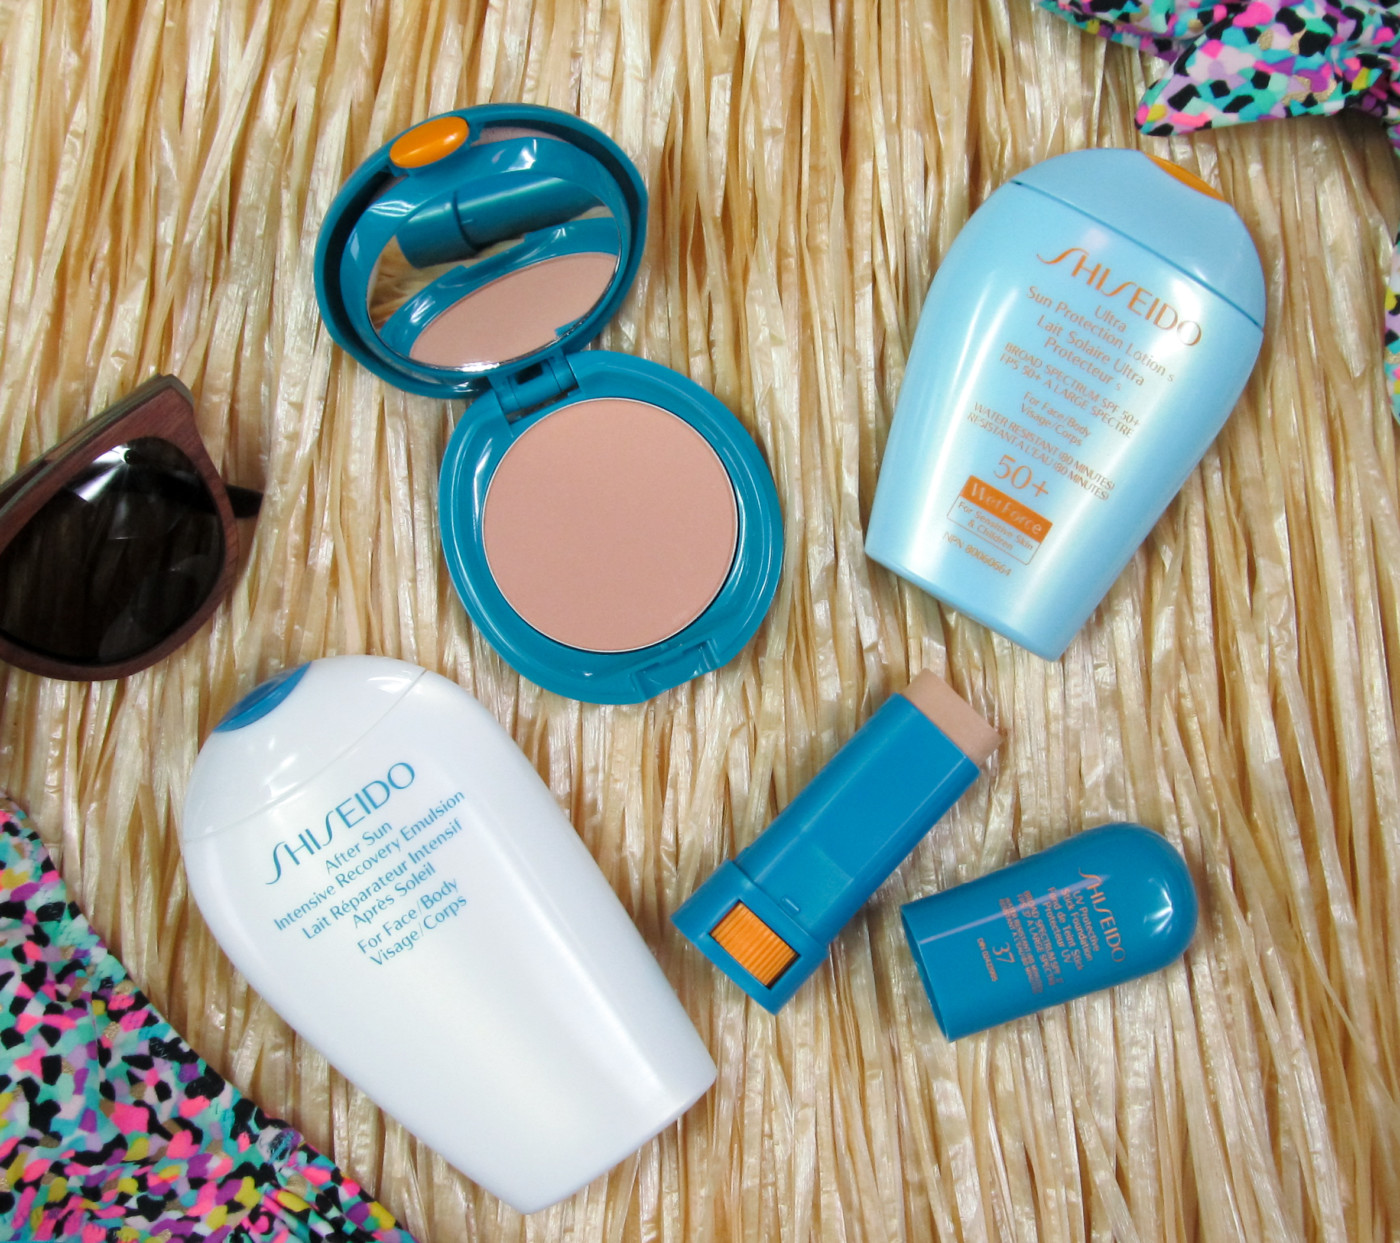 shiseido suncare, shiseido uv protective compact, shiseido uv protective stick foundation, shiseido ultra sun protection lotion, shiseido after sun intensive recovery emulsion, makeup with sunscreen in it, what makeup should i wear to the beach, what makeup has spf in it, how can i protect my skin from the sun, shiseido sun protection, best sunscreen for sensitive skin, sunscreen sensitive skin, how can i protect my skin from the sun, what to pack on vacation